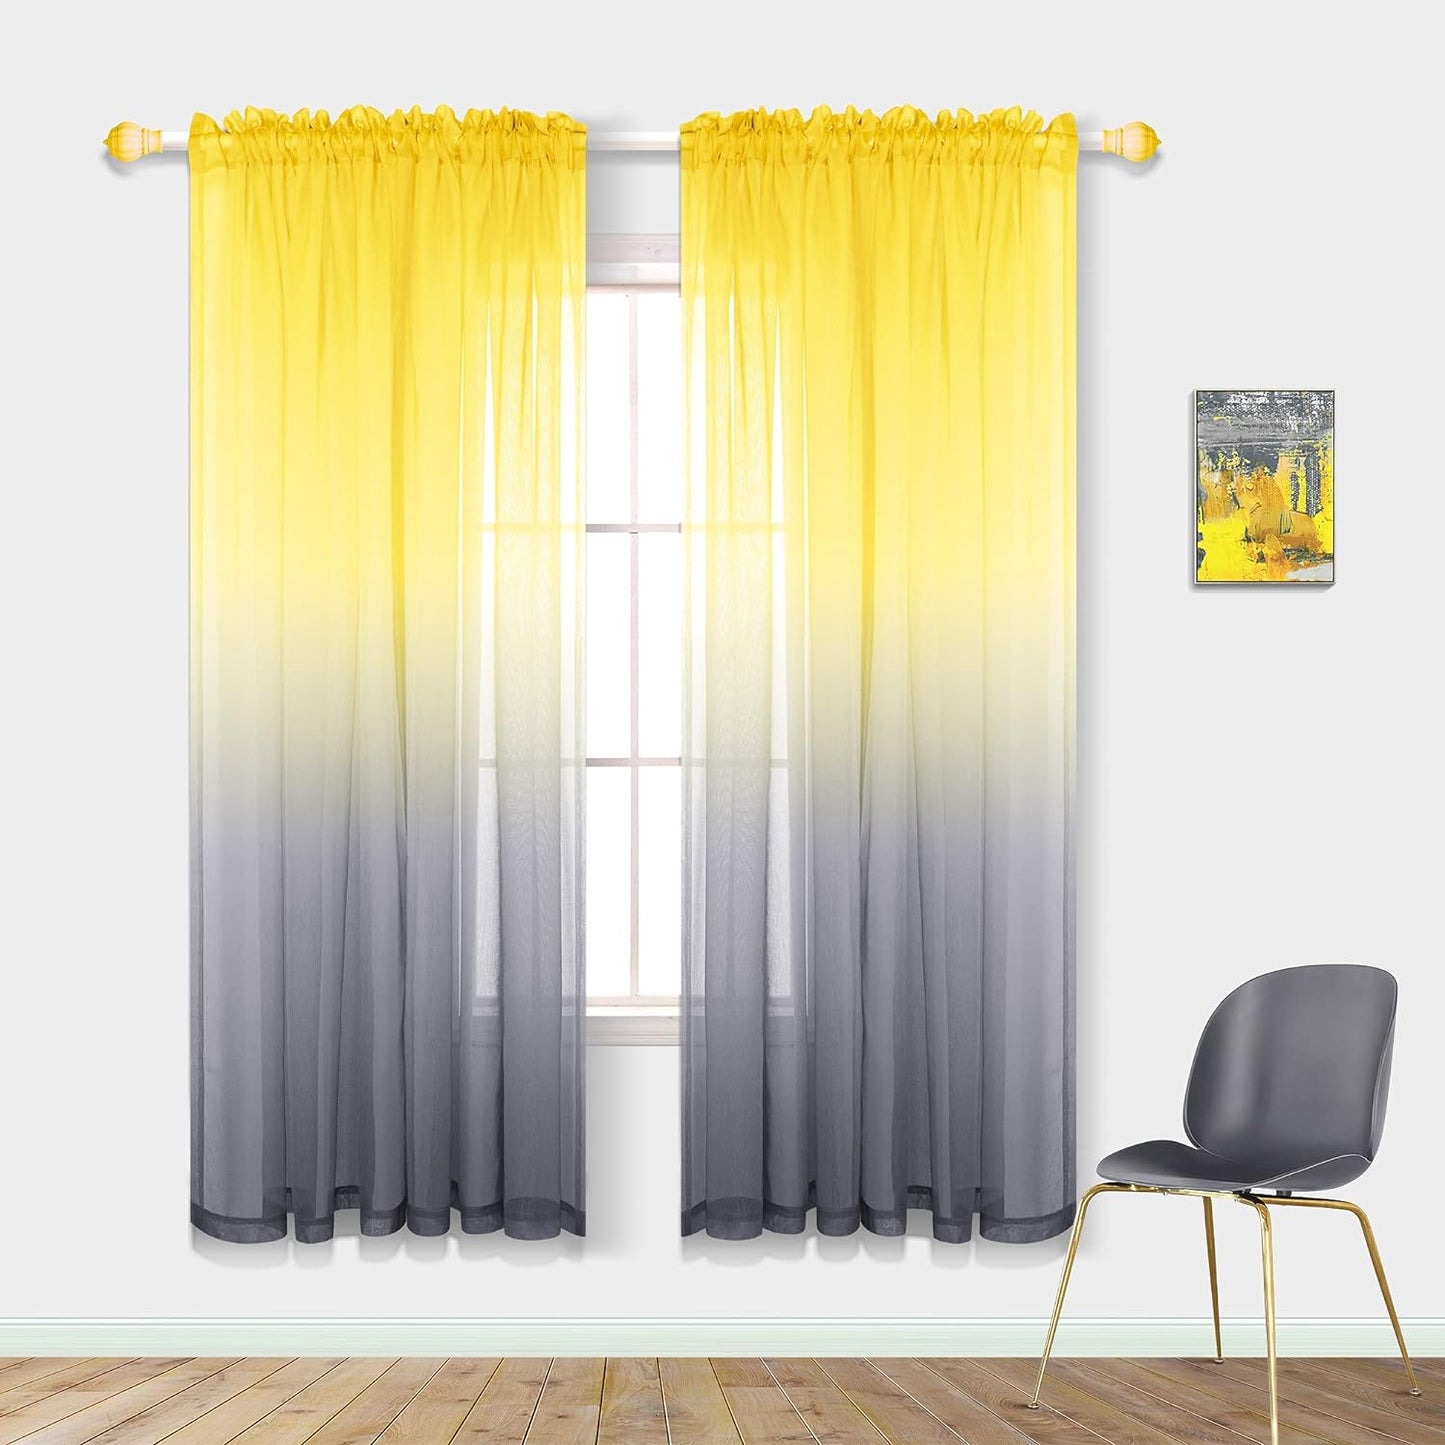 Kitchen Curtains Yellow Lemon and Light Grey Sheer Bathroom Window Curtains 42 X 45 Inch Length Sunflower Yellow and Gray  PITALK TEXTILE Yellow And Grey 52X63 